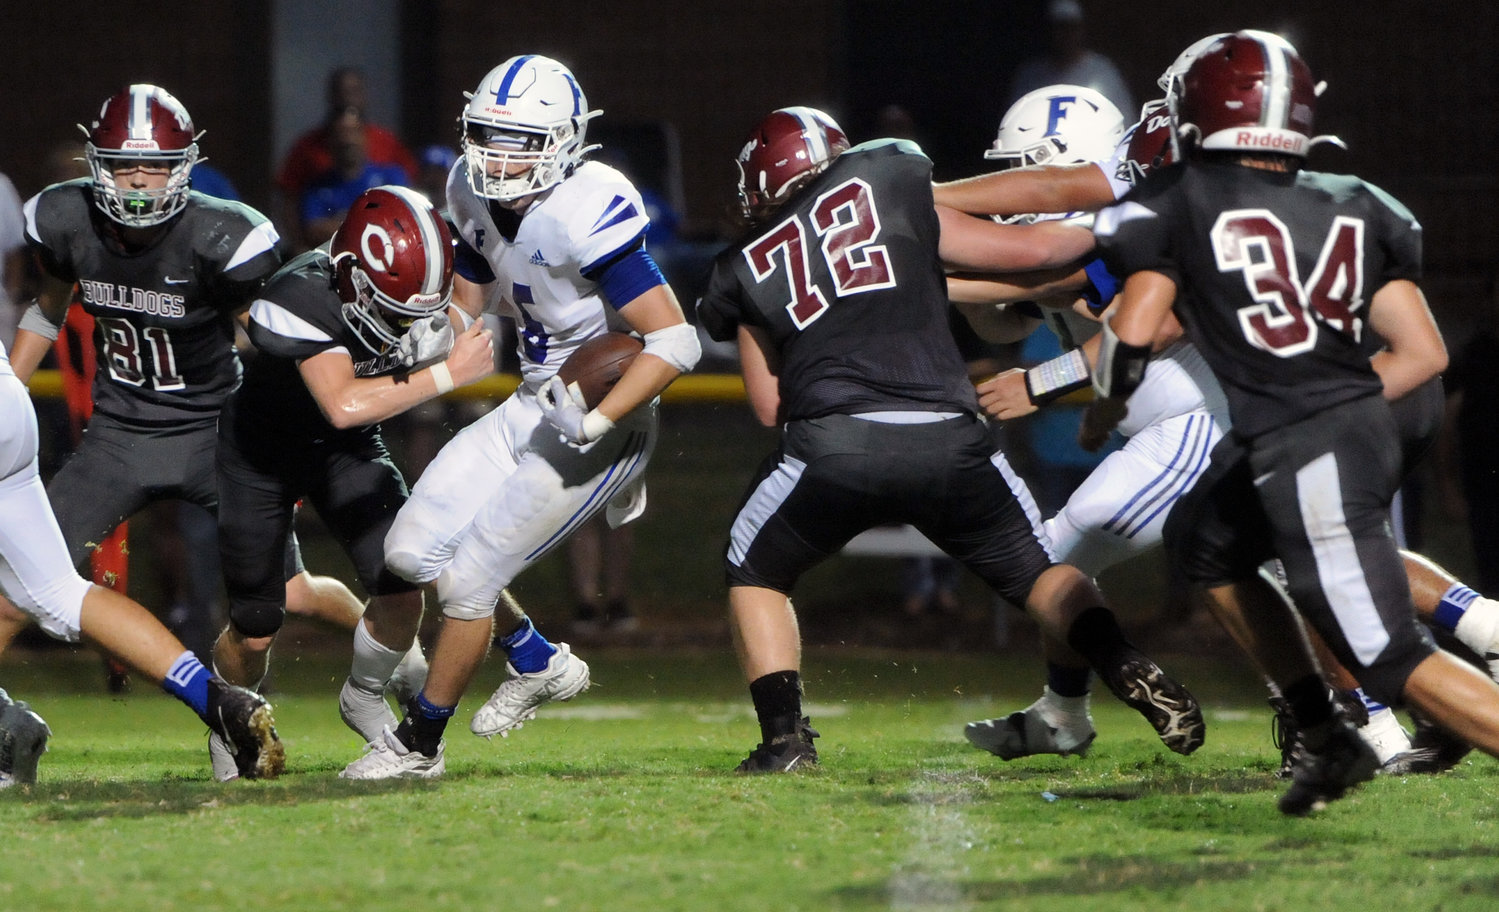 A host of Bulldogs converge to bring down Rocket quarterback Ryan Hill on a keeper.